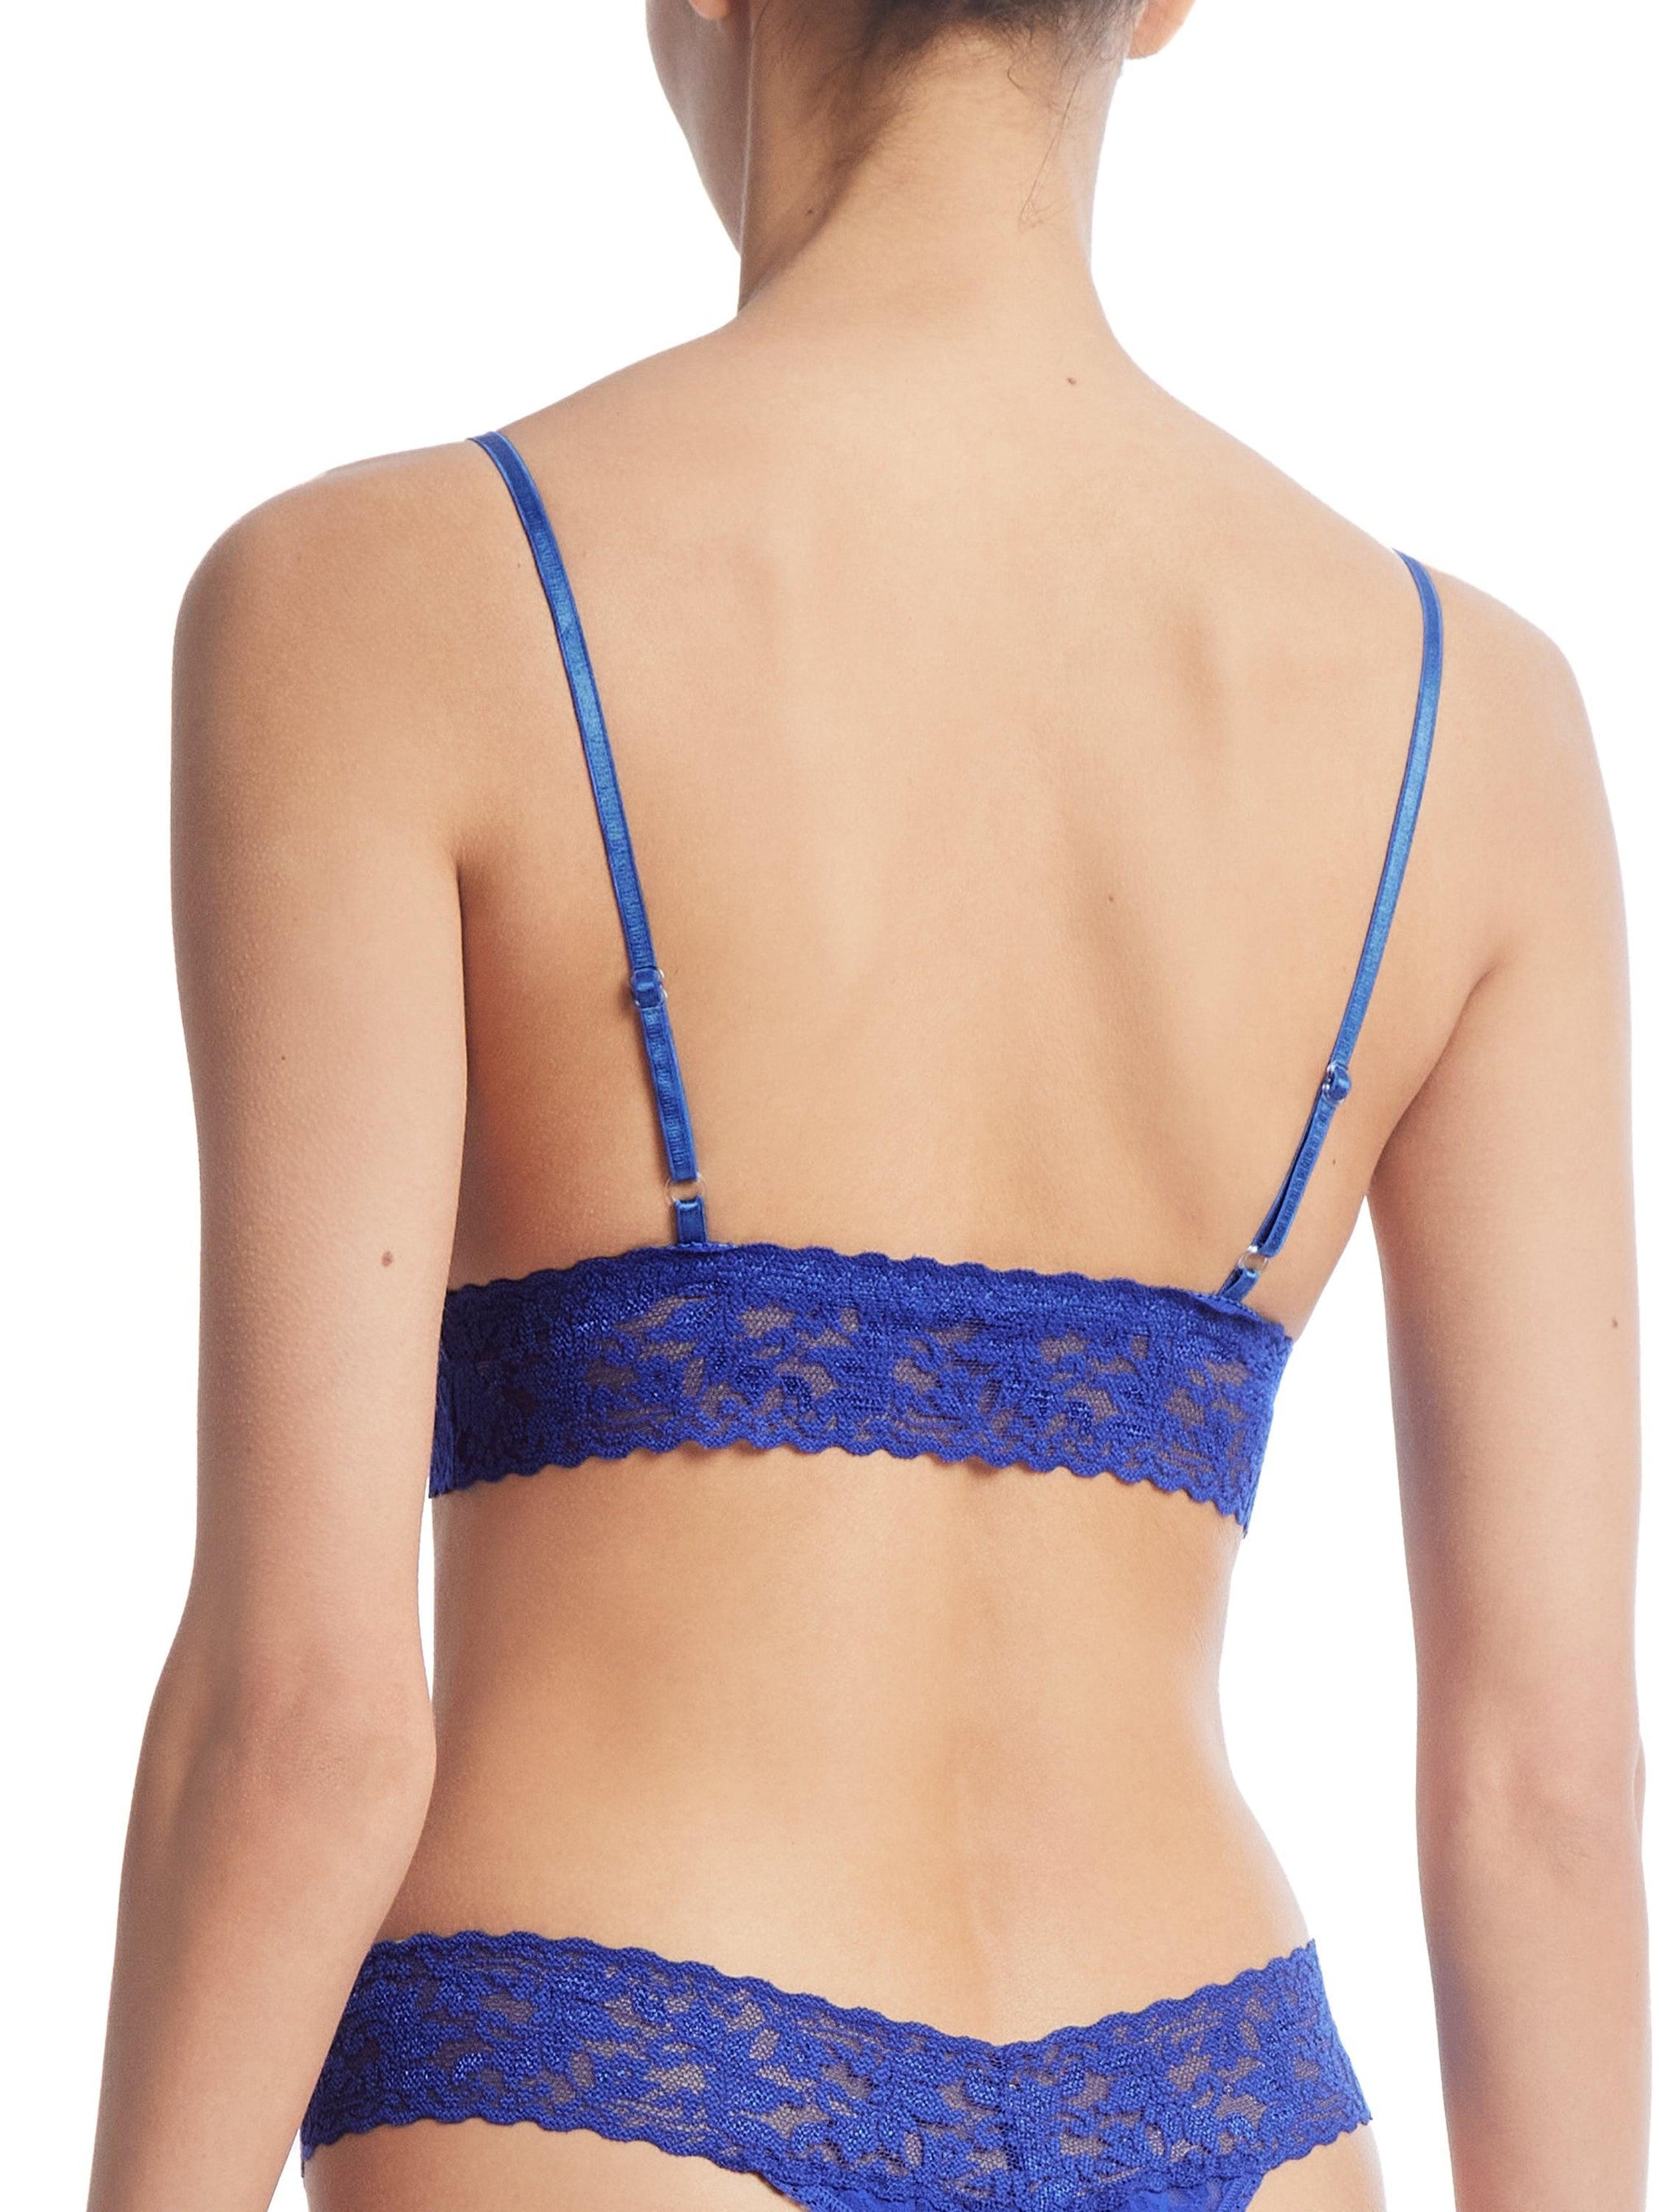 Blue Bralet with Lace Online Shopping